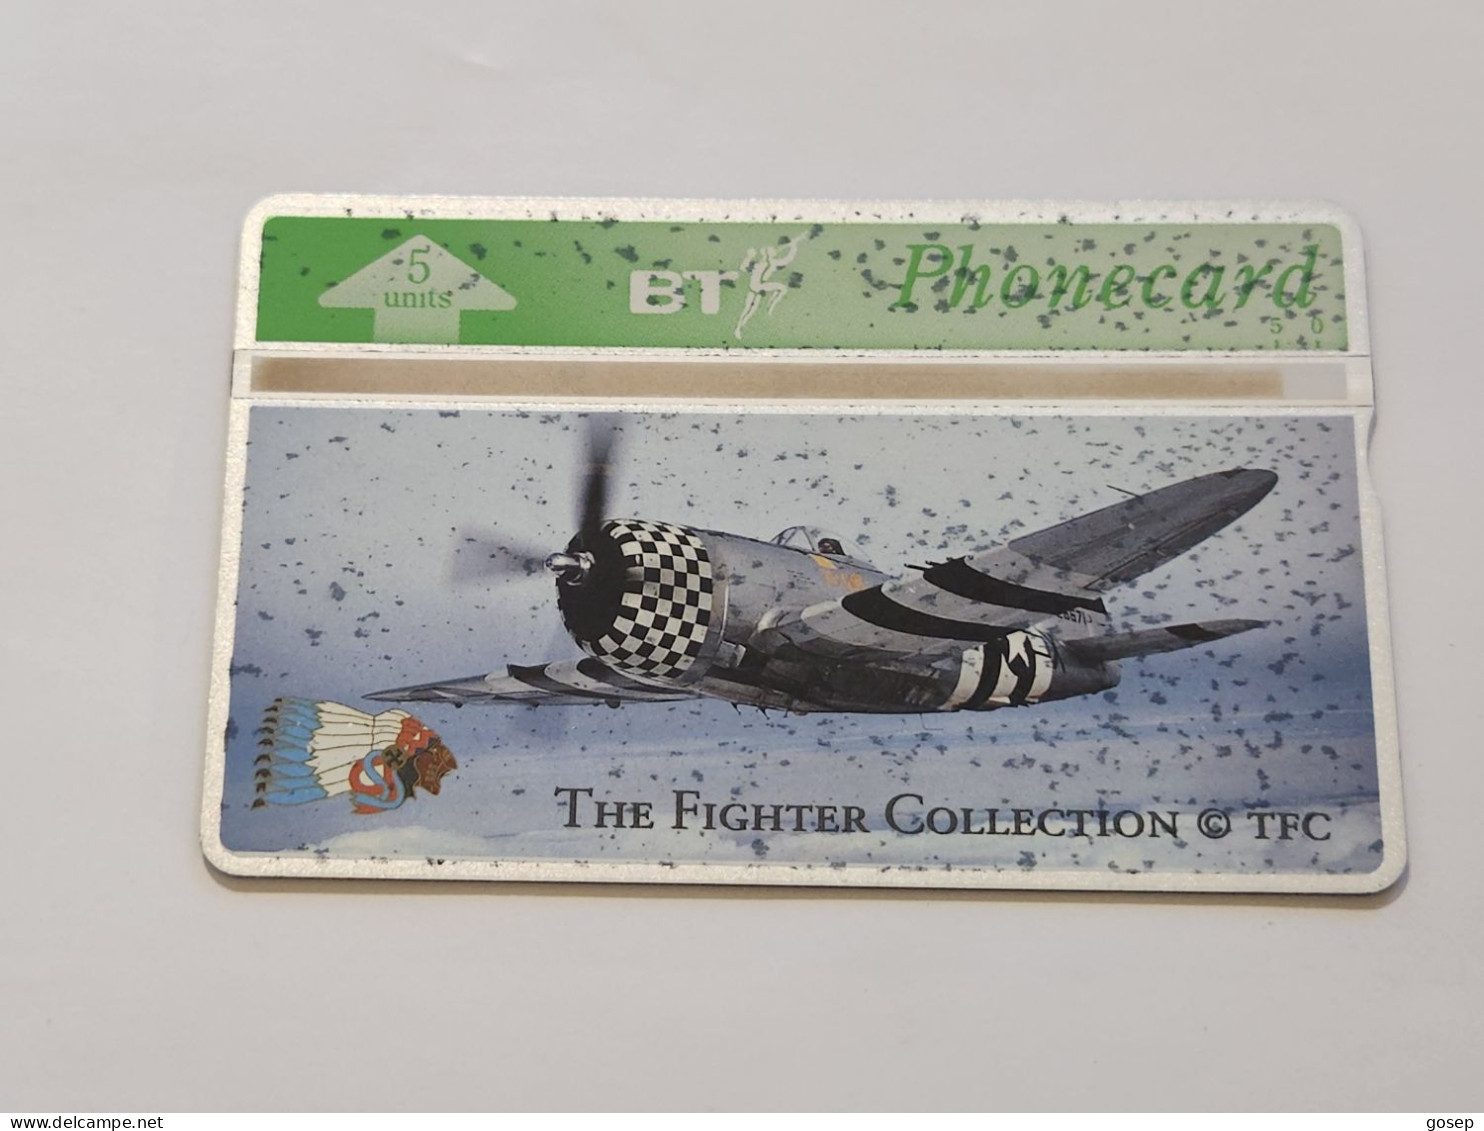 United Kingdom-(BTG-313)-Fighter Collection-(2)(SPOTS)-(286)(5units)(465D12477)(tirage-900)price Cataloge-10.00£-mint - BT General Issues